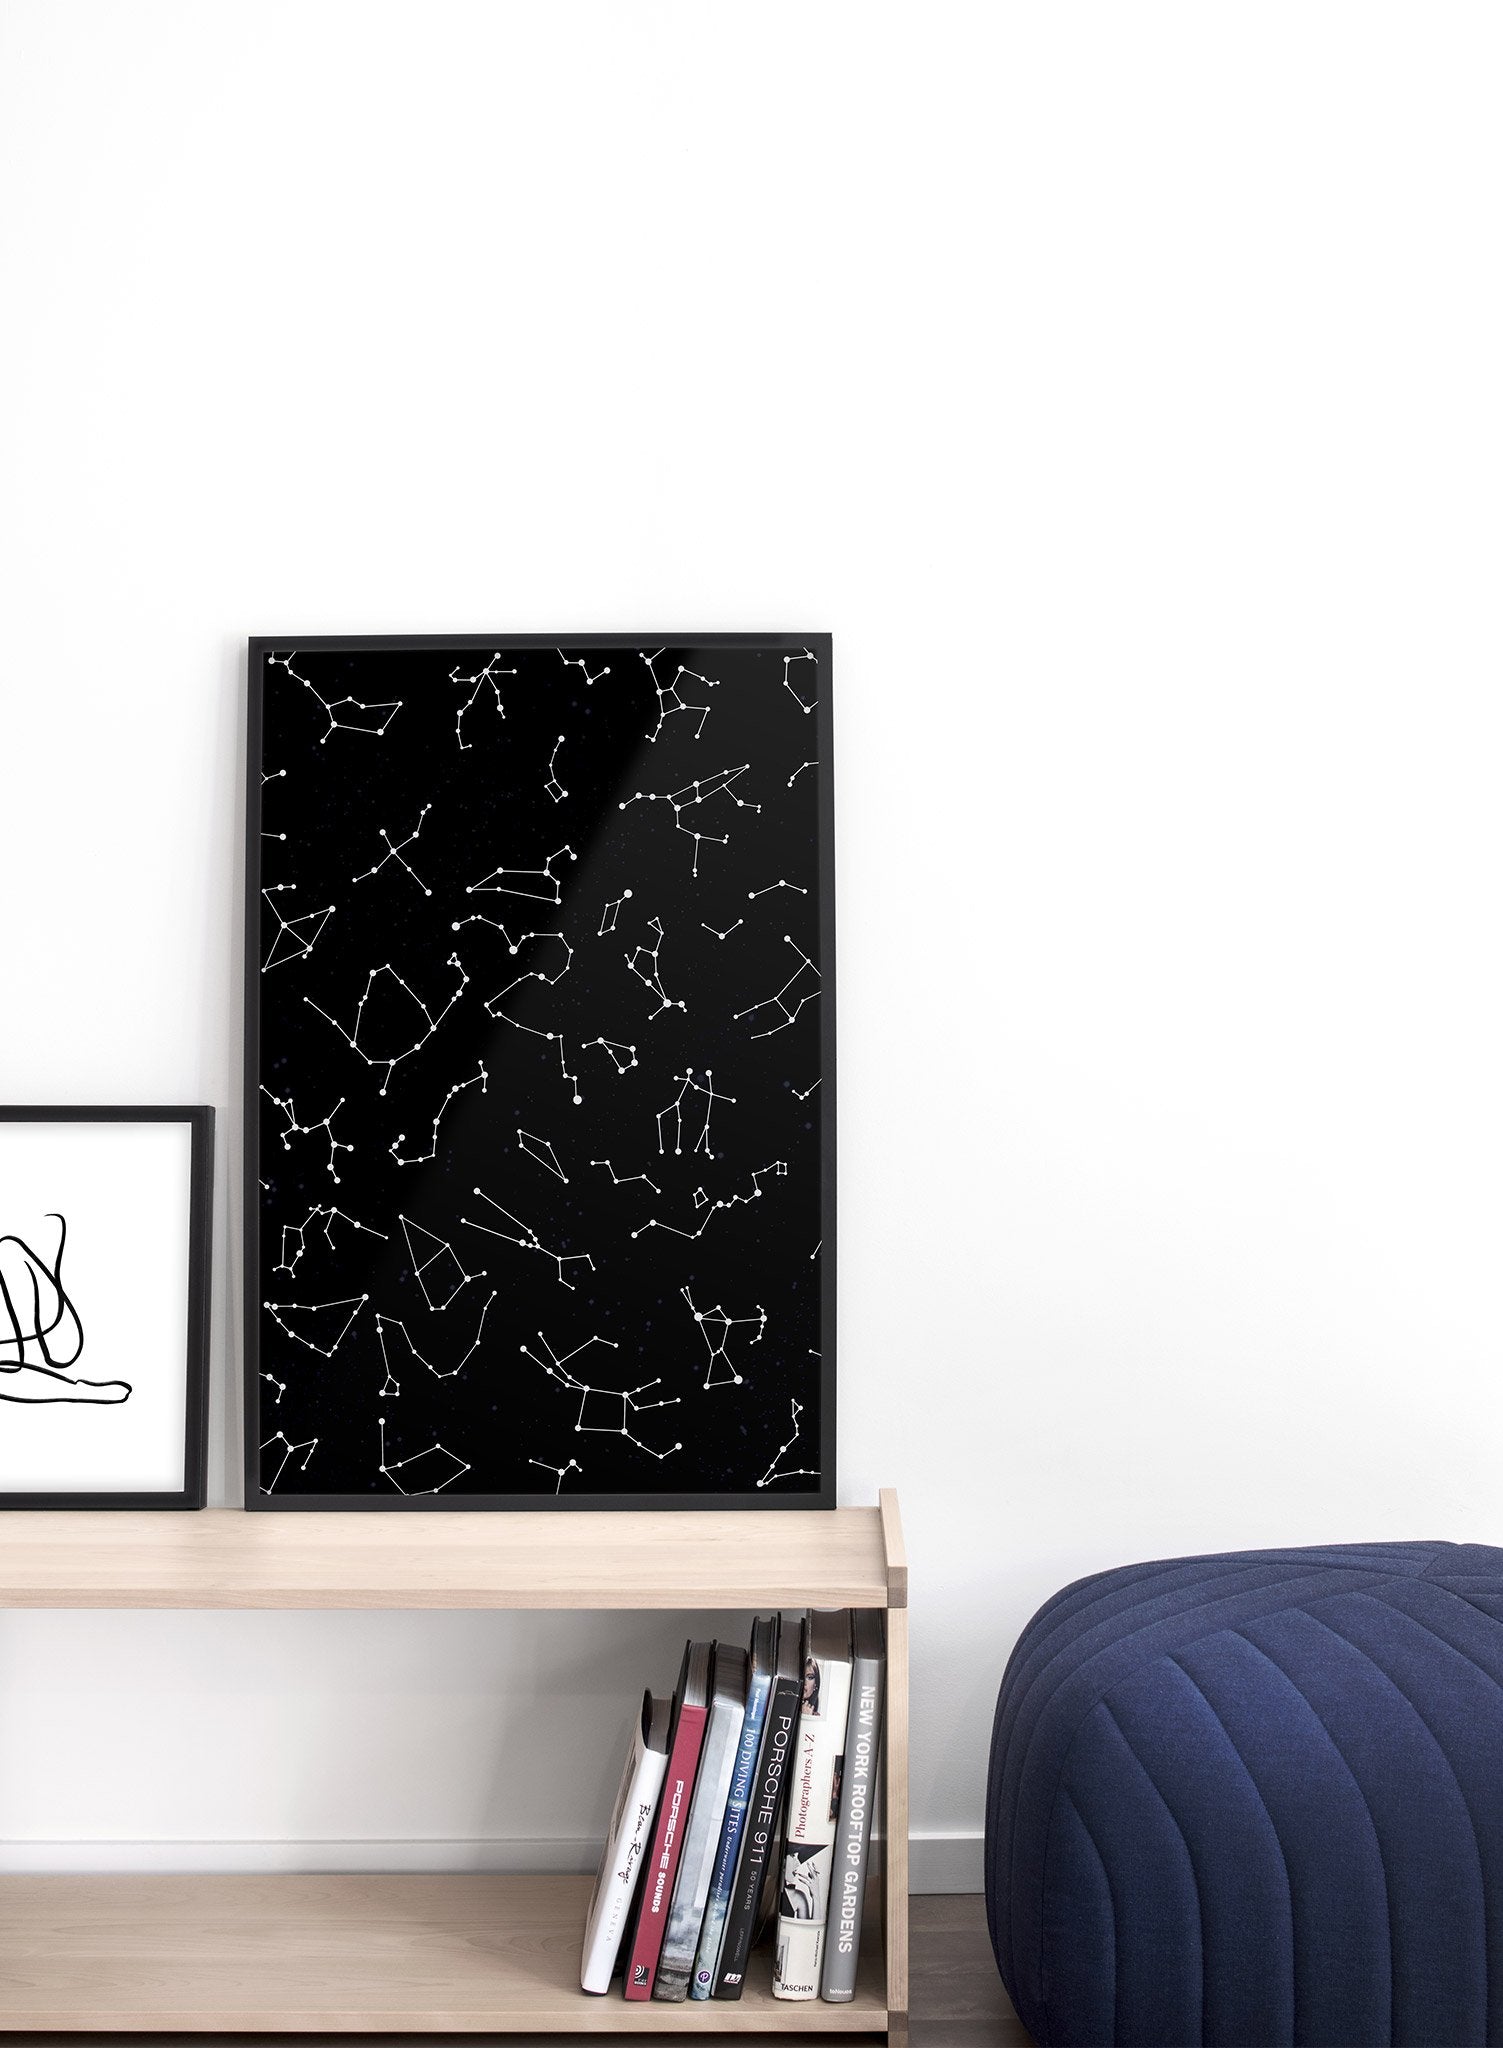 Celestial illustration poster by Opposite Wall with star constellations - Lifestyle Duo - Living Room